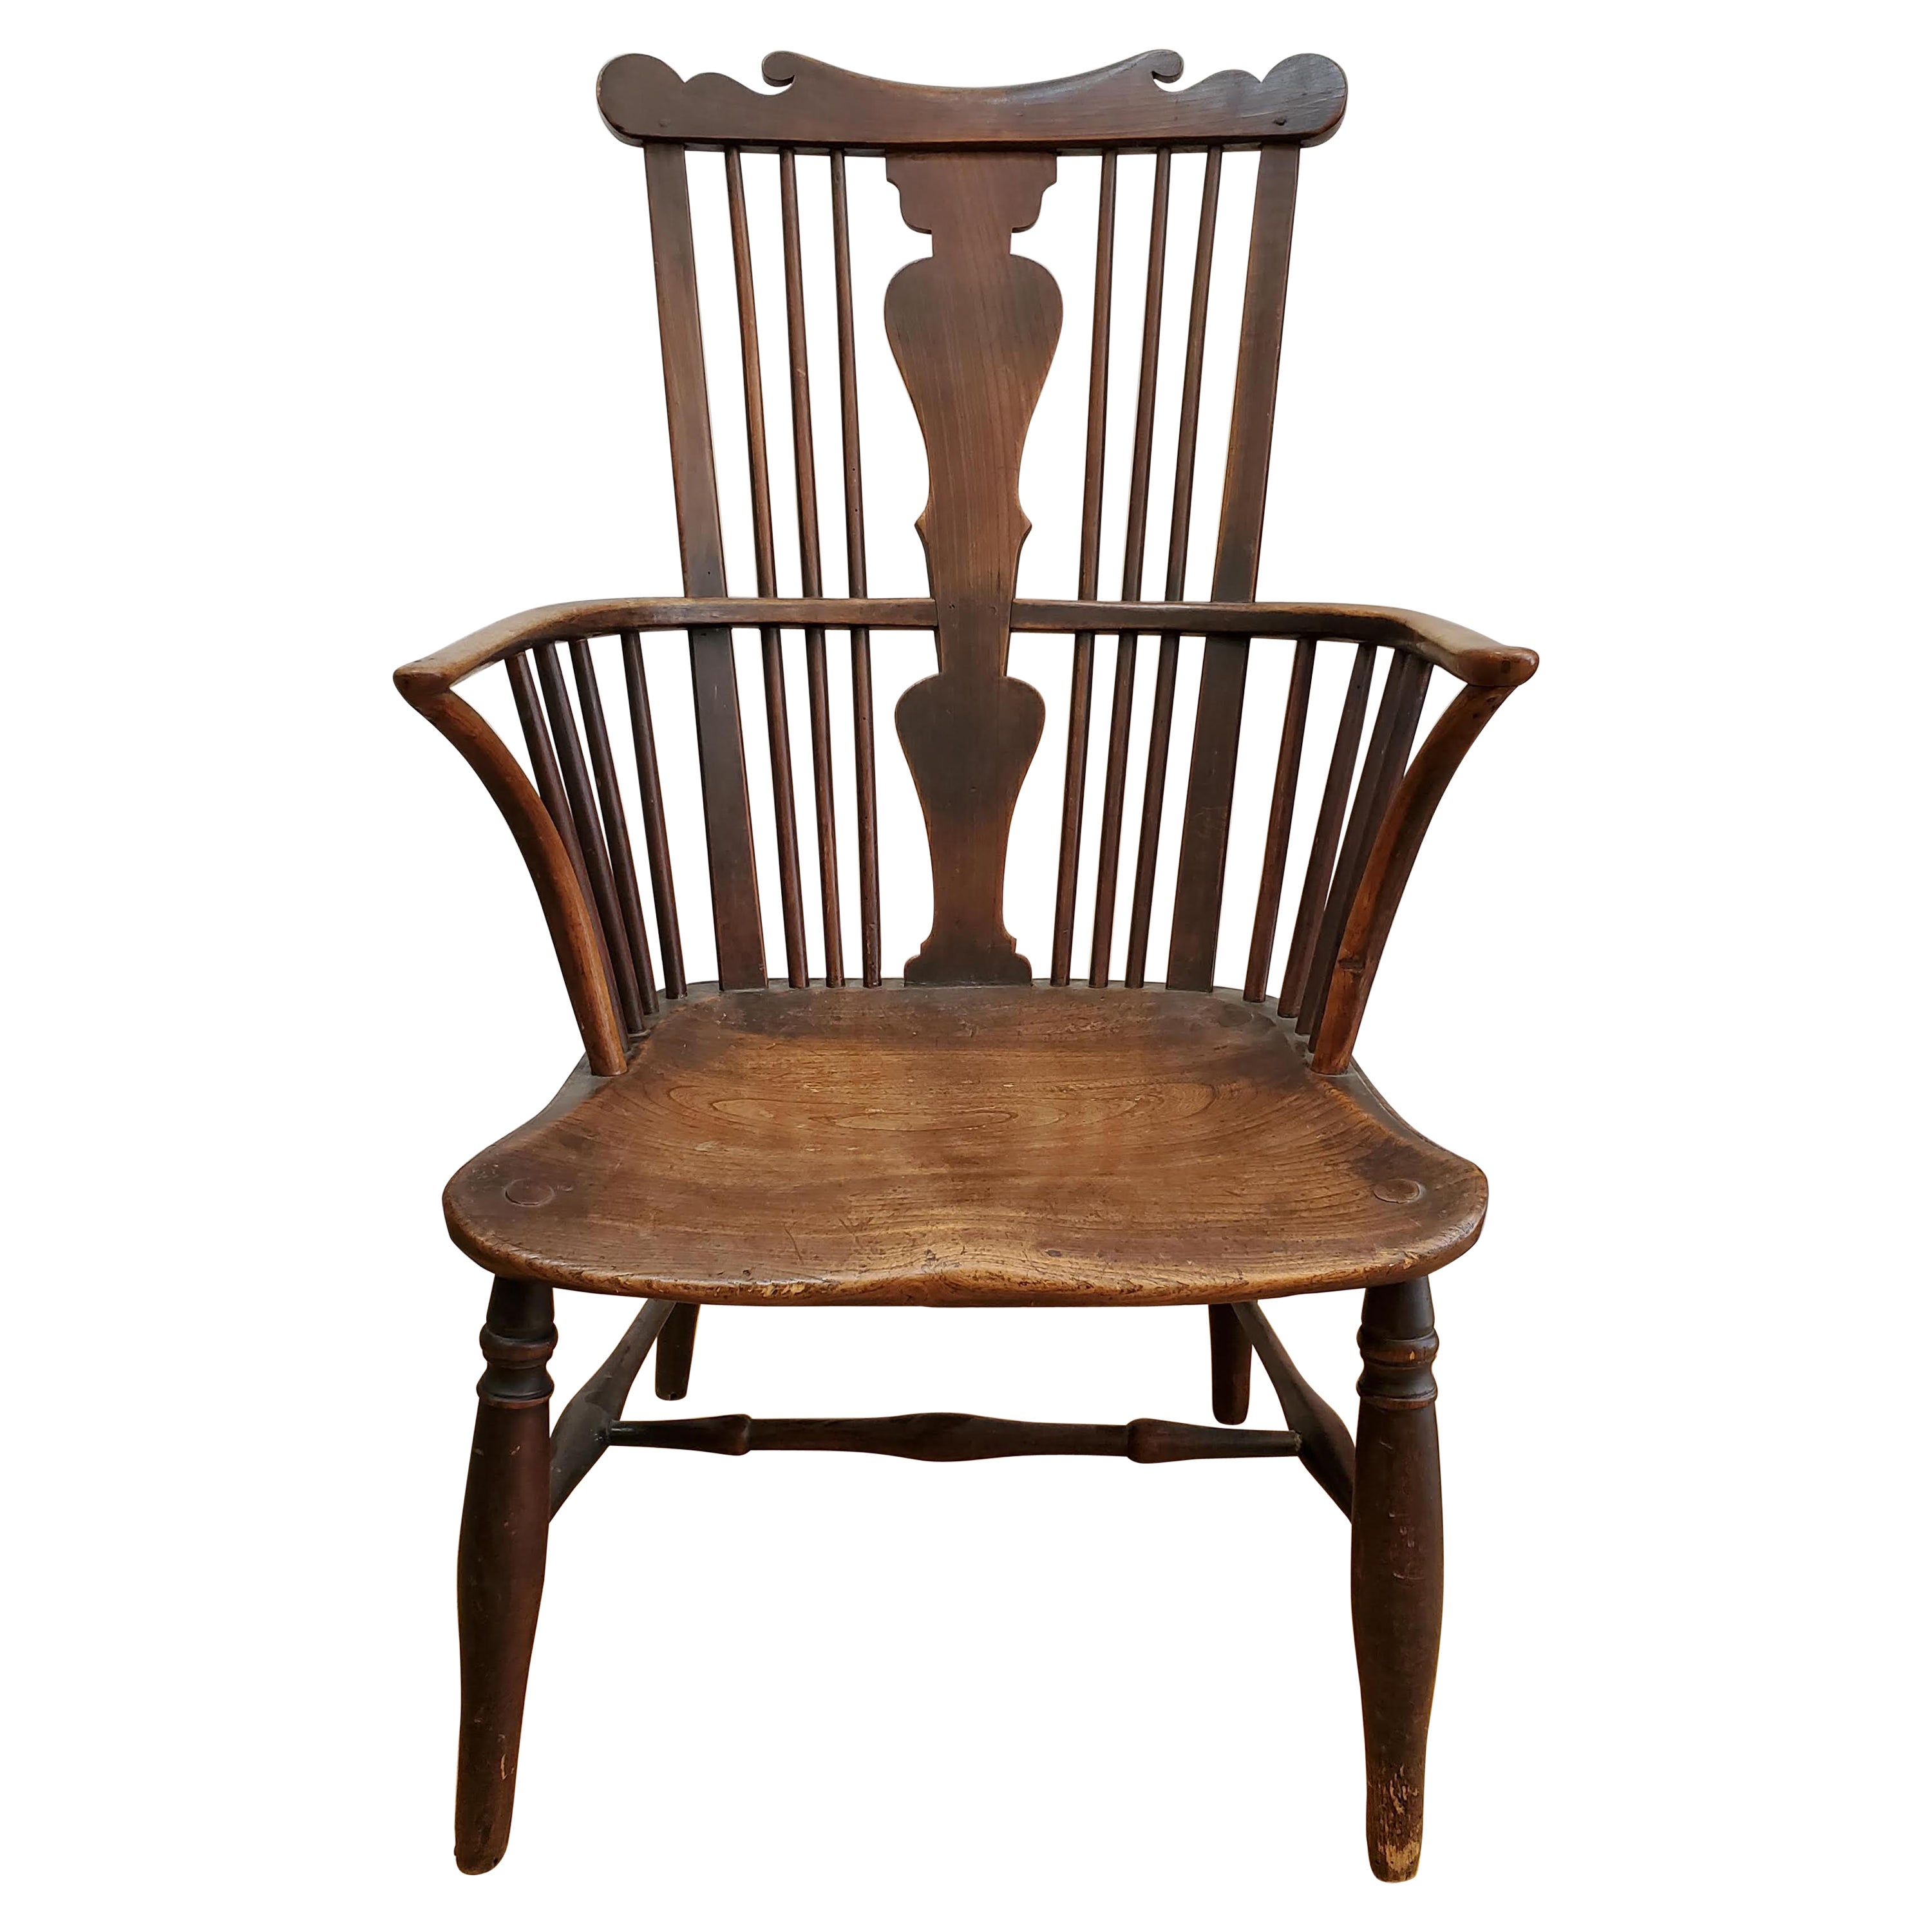 Small 18th Century English Comb Back Windsor Armchair Made of Elm, Ash & Walnut